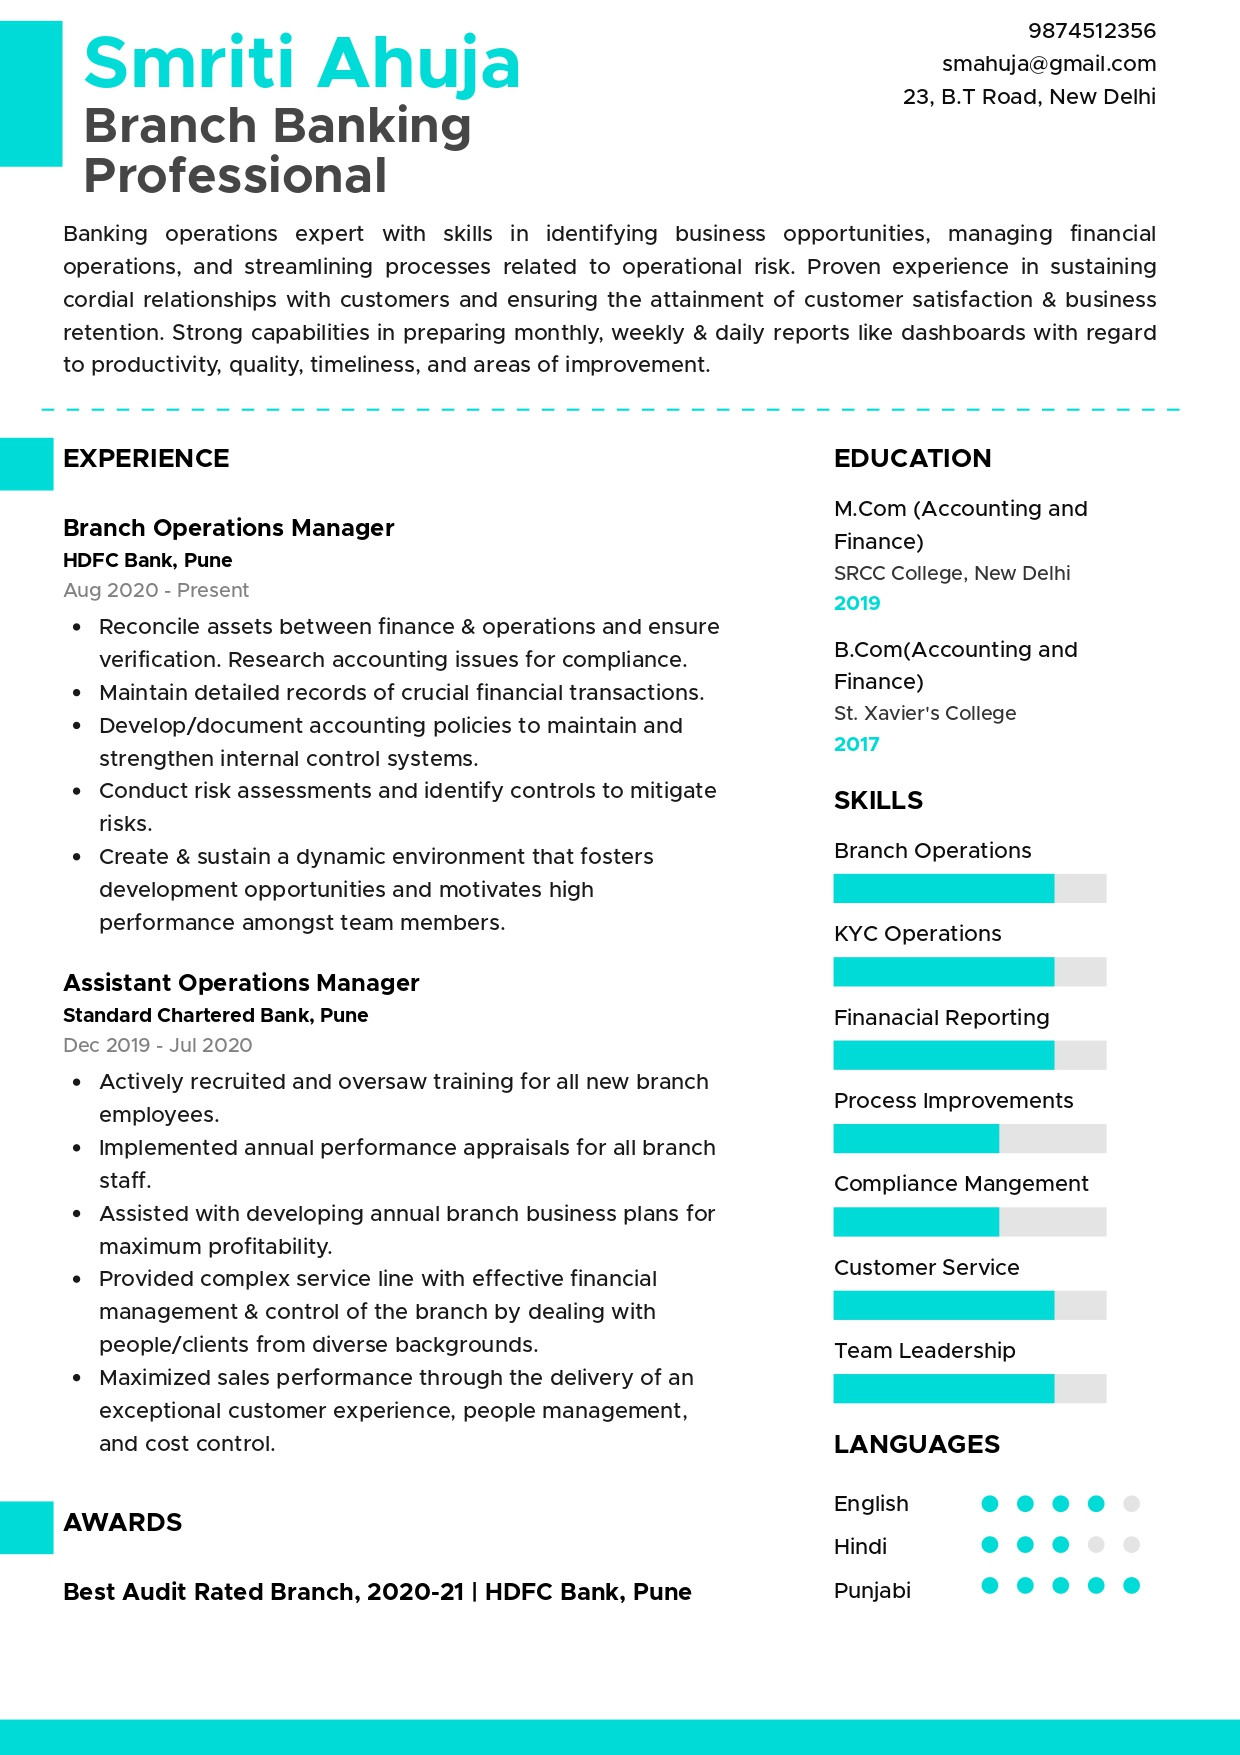 Professional Resume Samples for Banking Jobs Sample Resume Of Branch Banking Professional with Template …